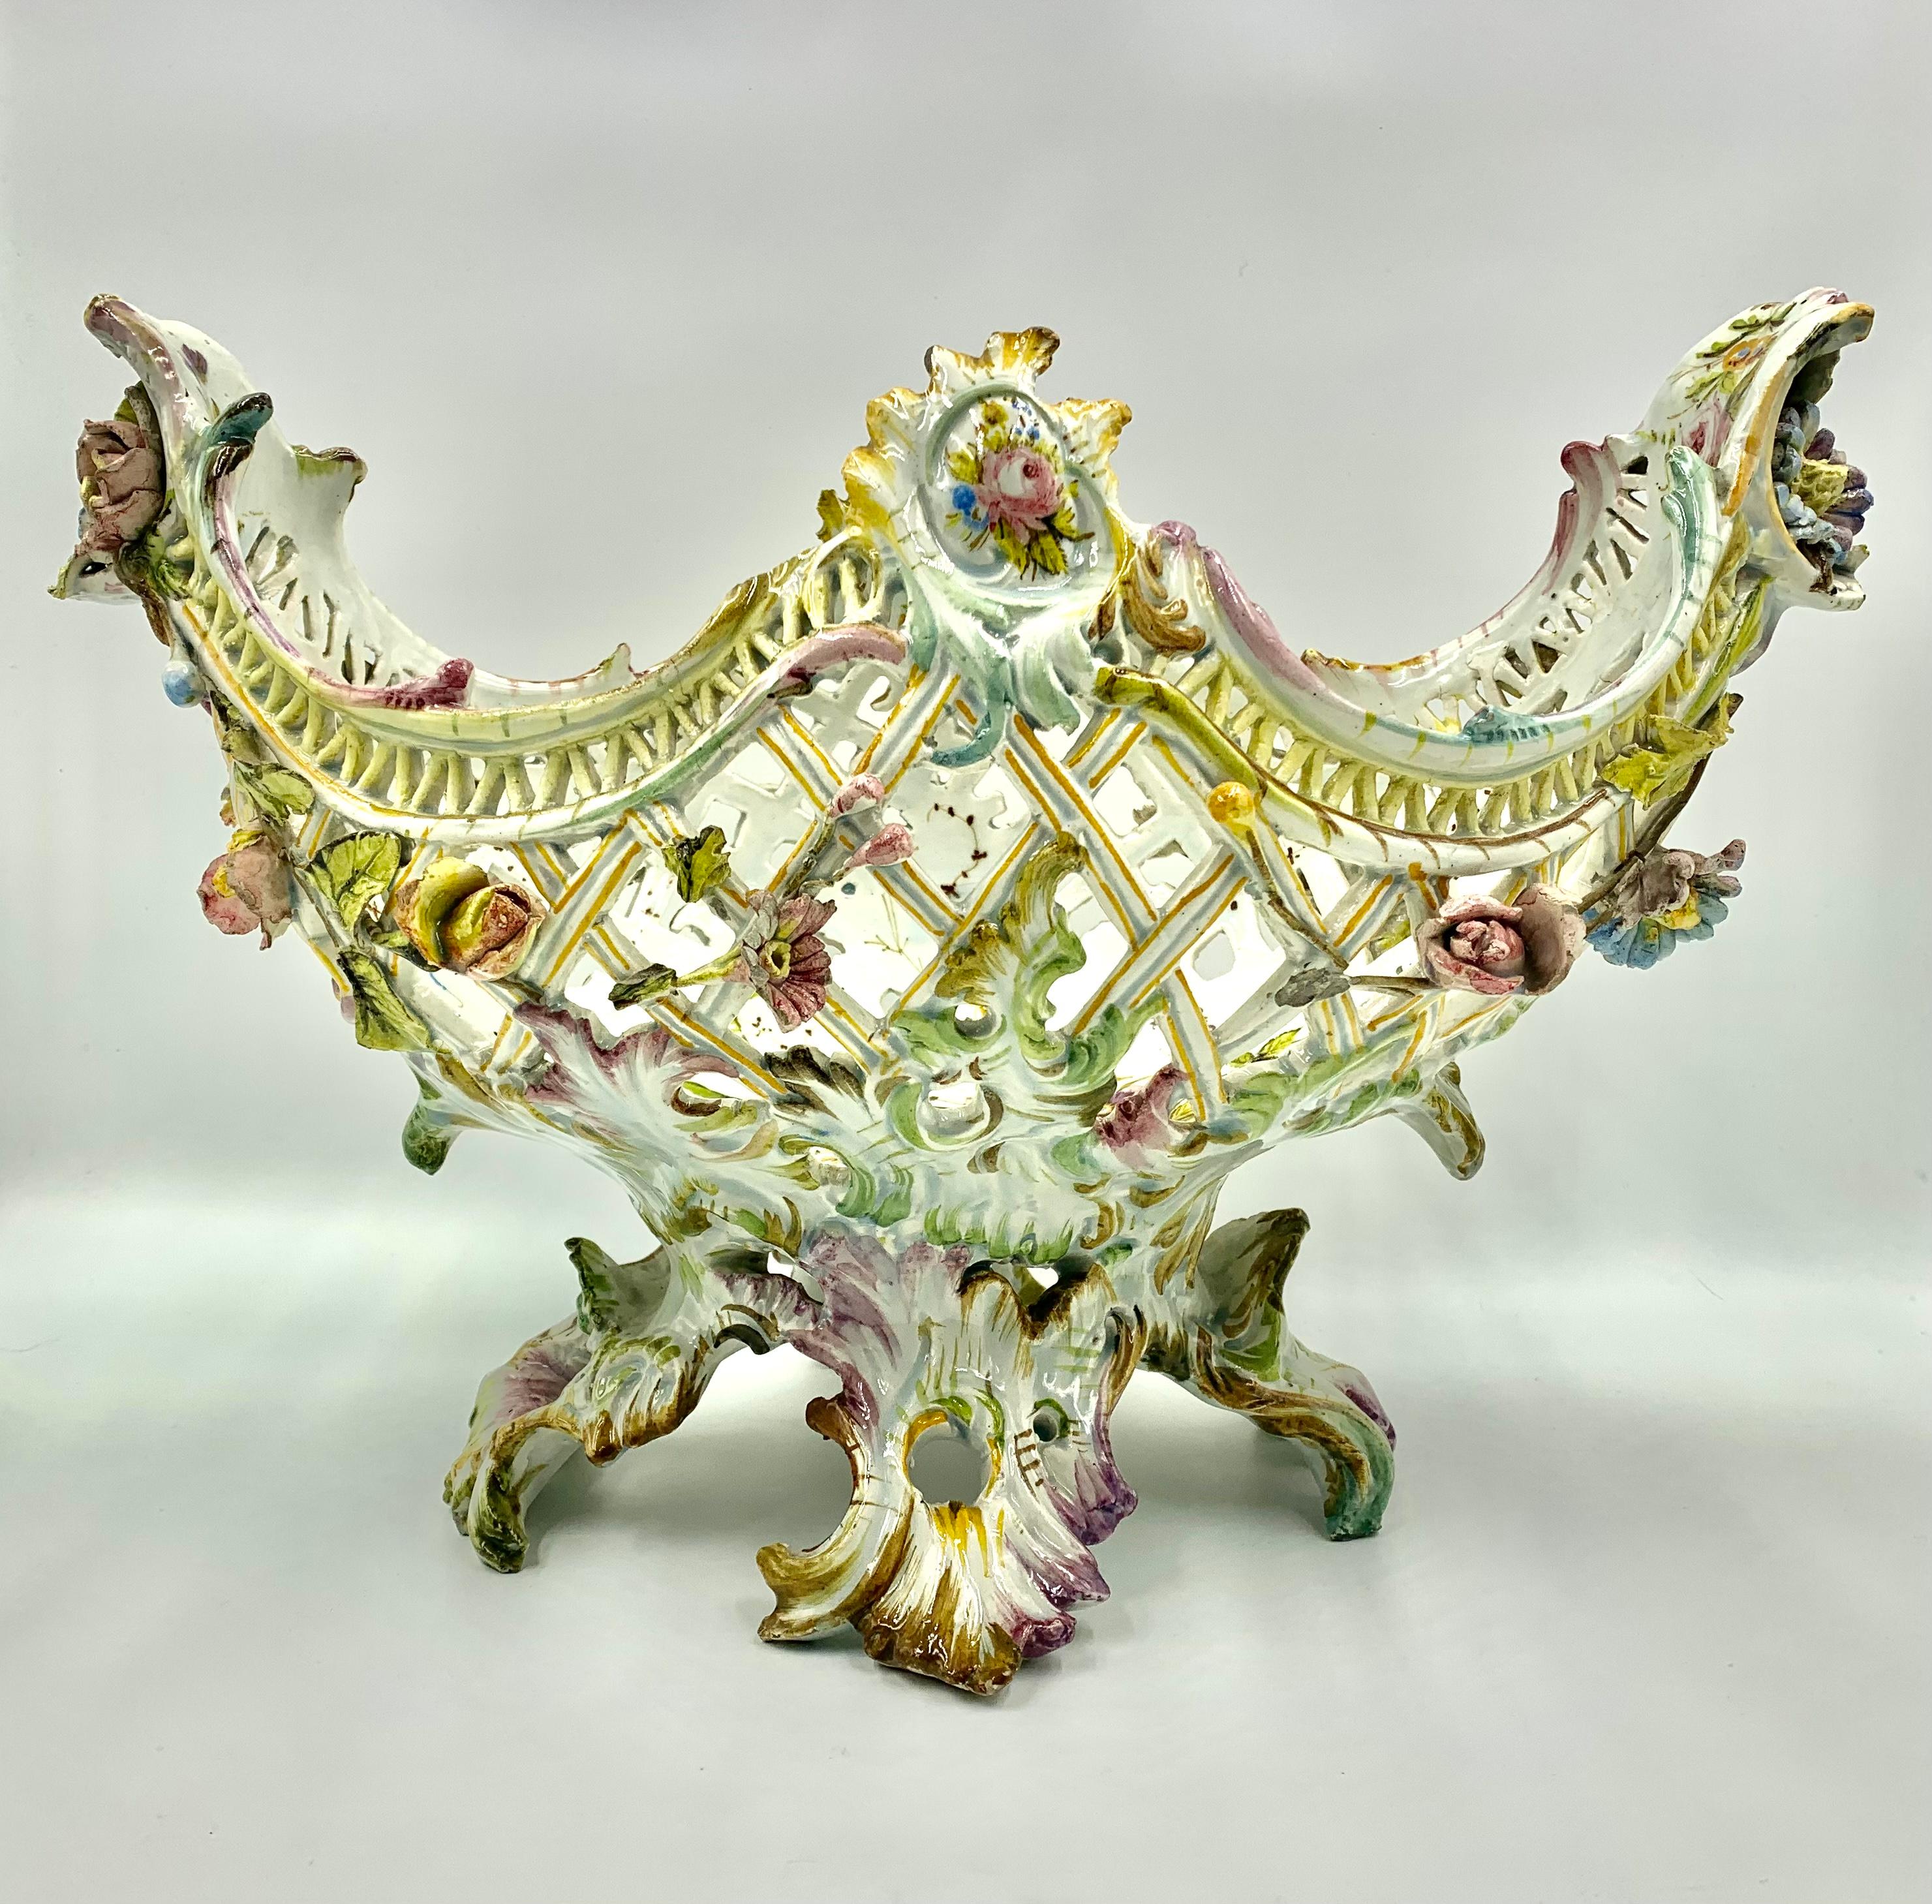 Rare Reticulated Antique Italian Nove Faience Rococo Flower Garland Centerpiece For Sale 5